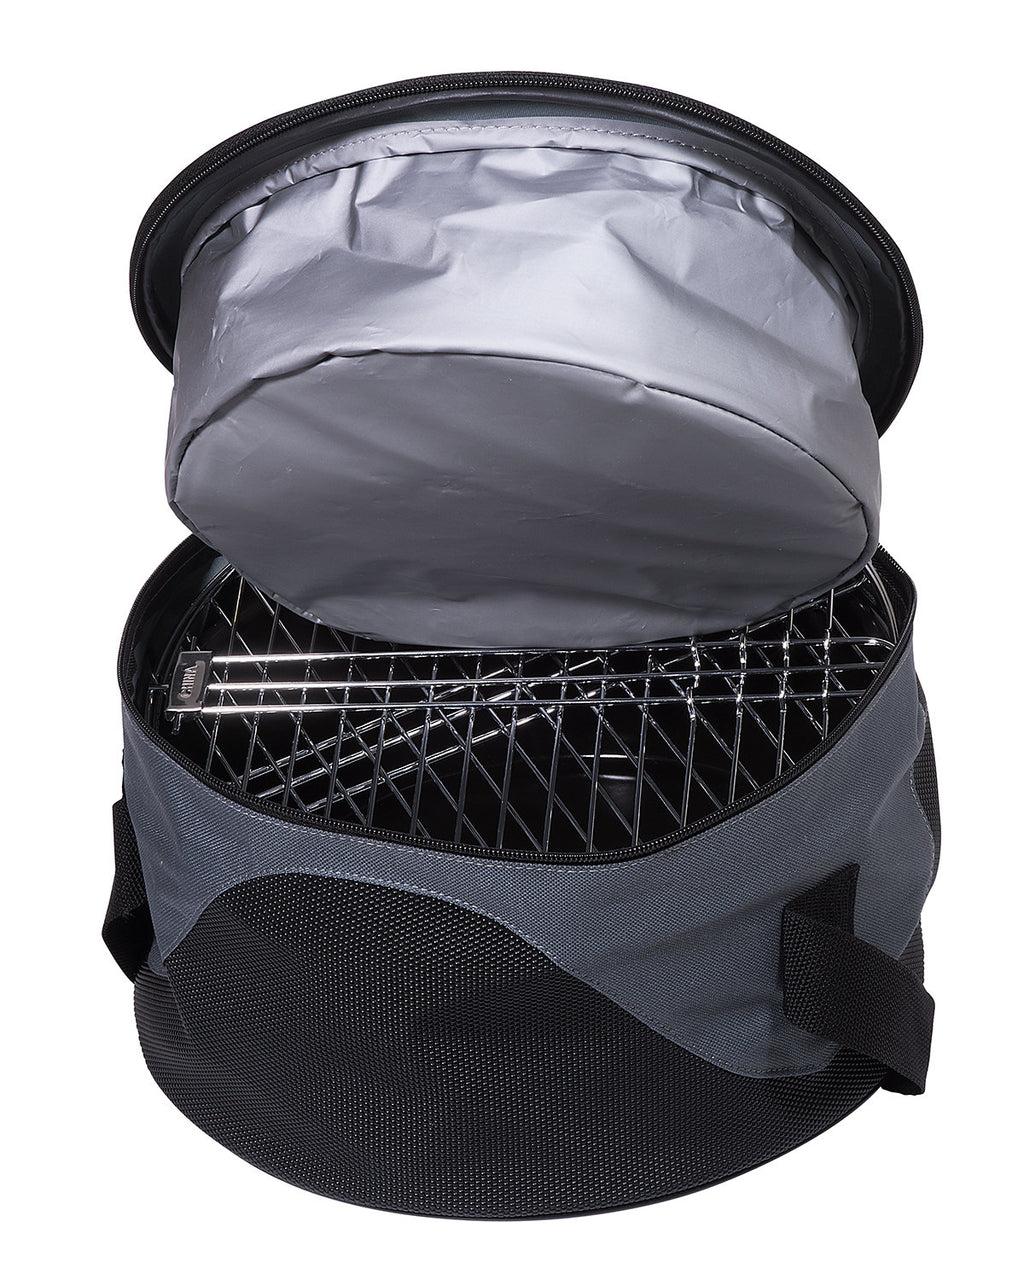 Weekend Explorer Grill And Cooler ( 6-Pack )